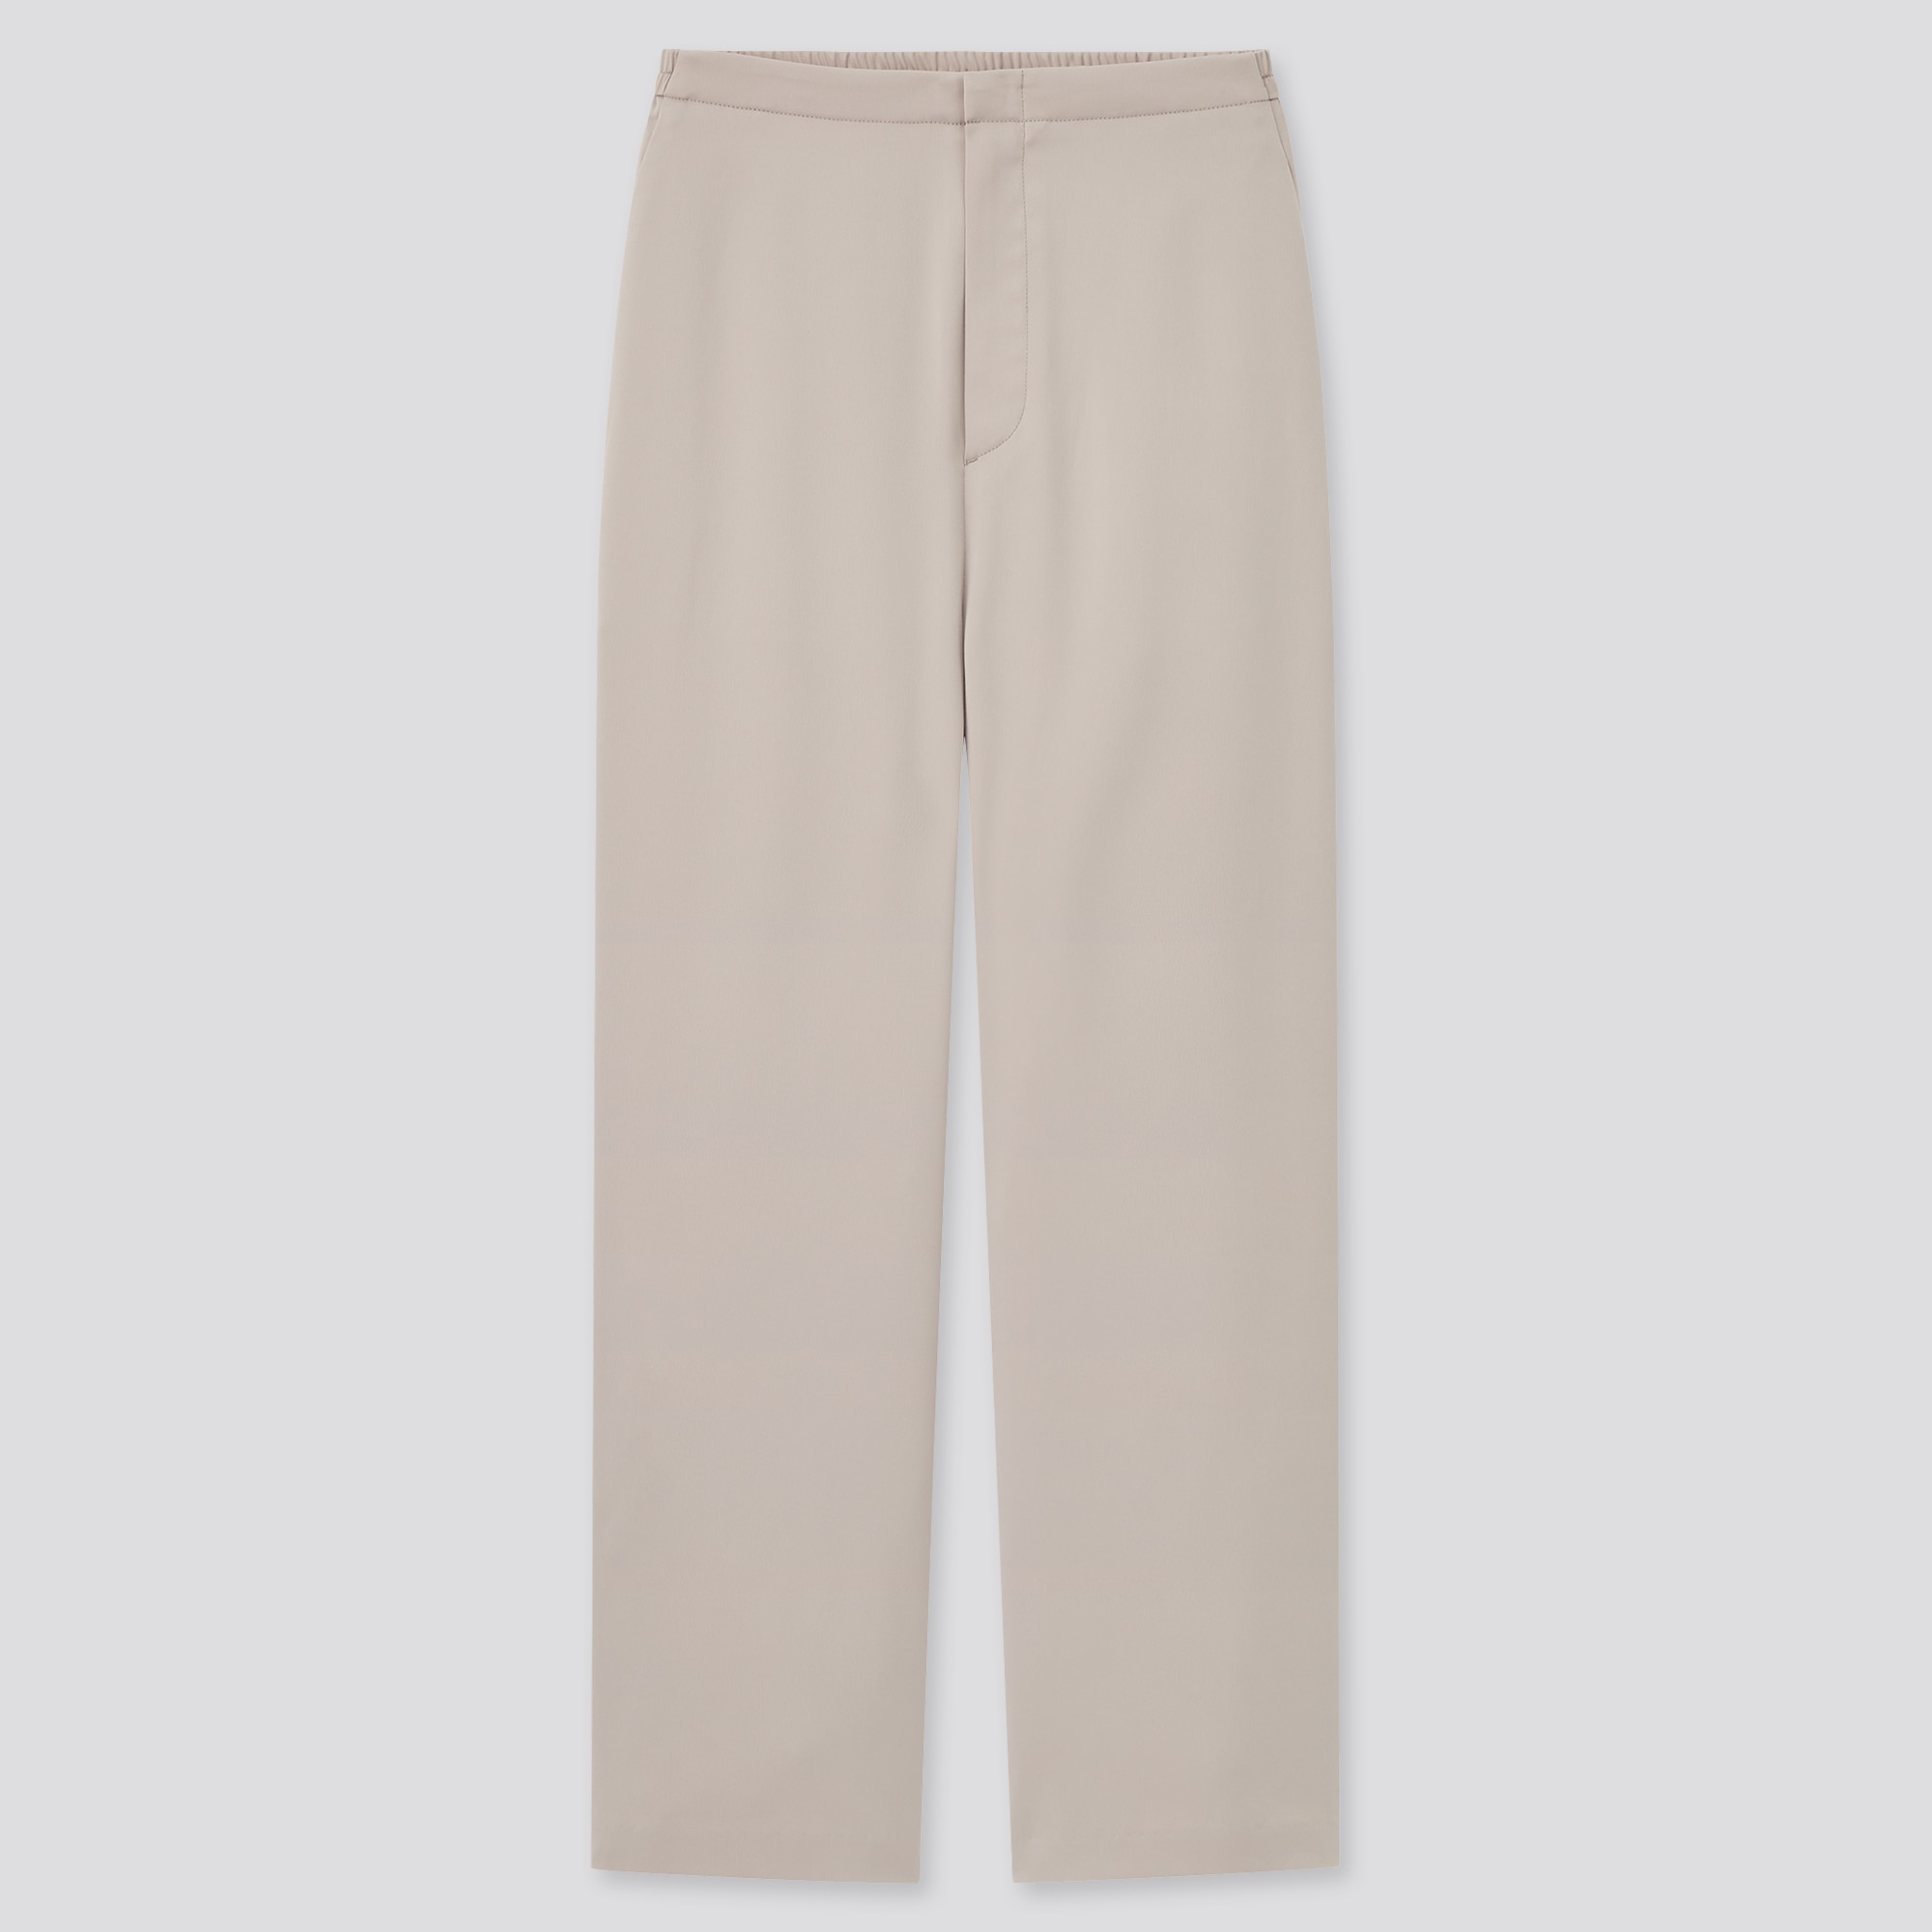 UNIQLO Satin Relaxed Straight Pants | StyleHint